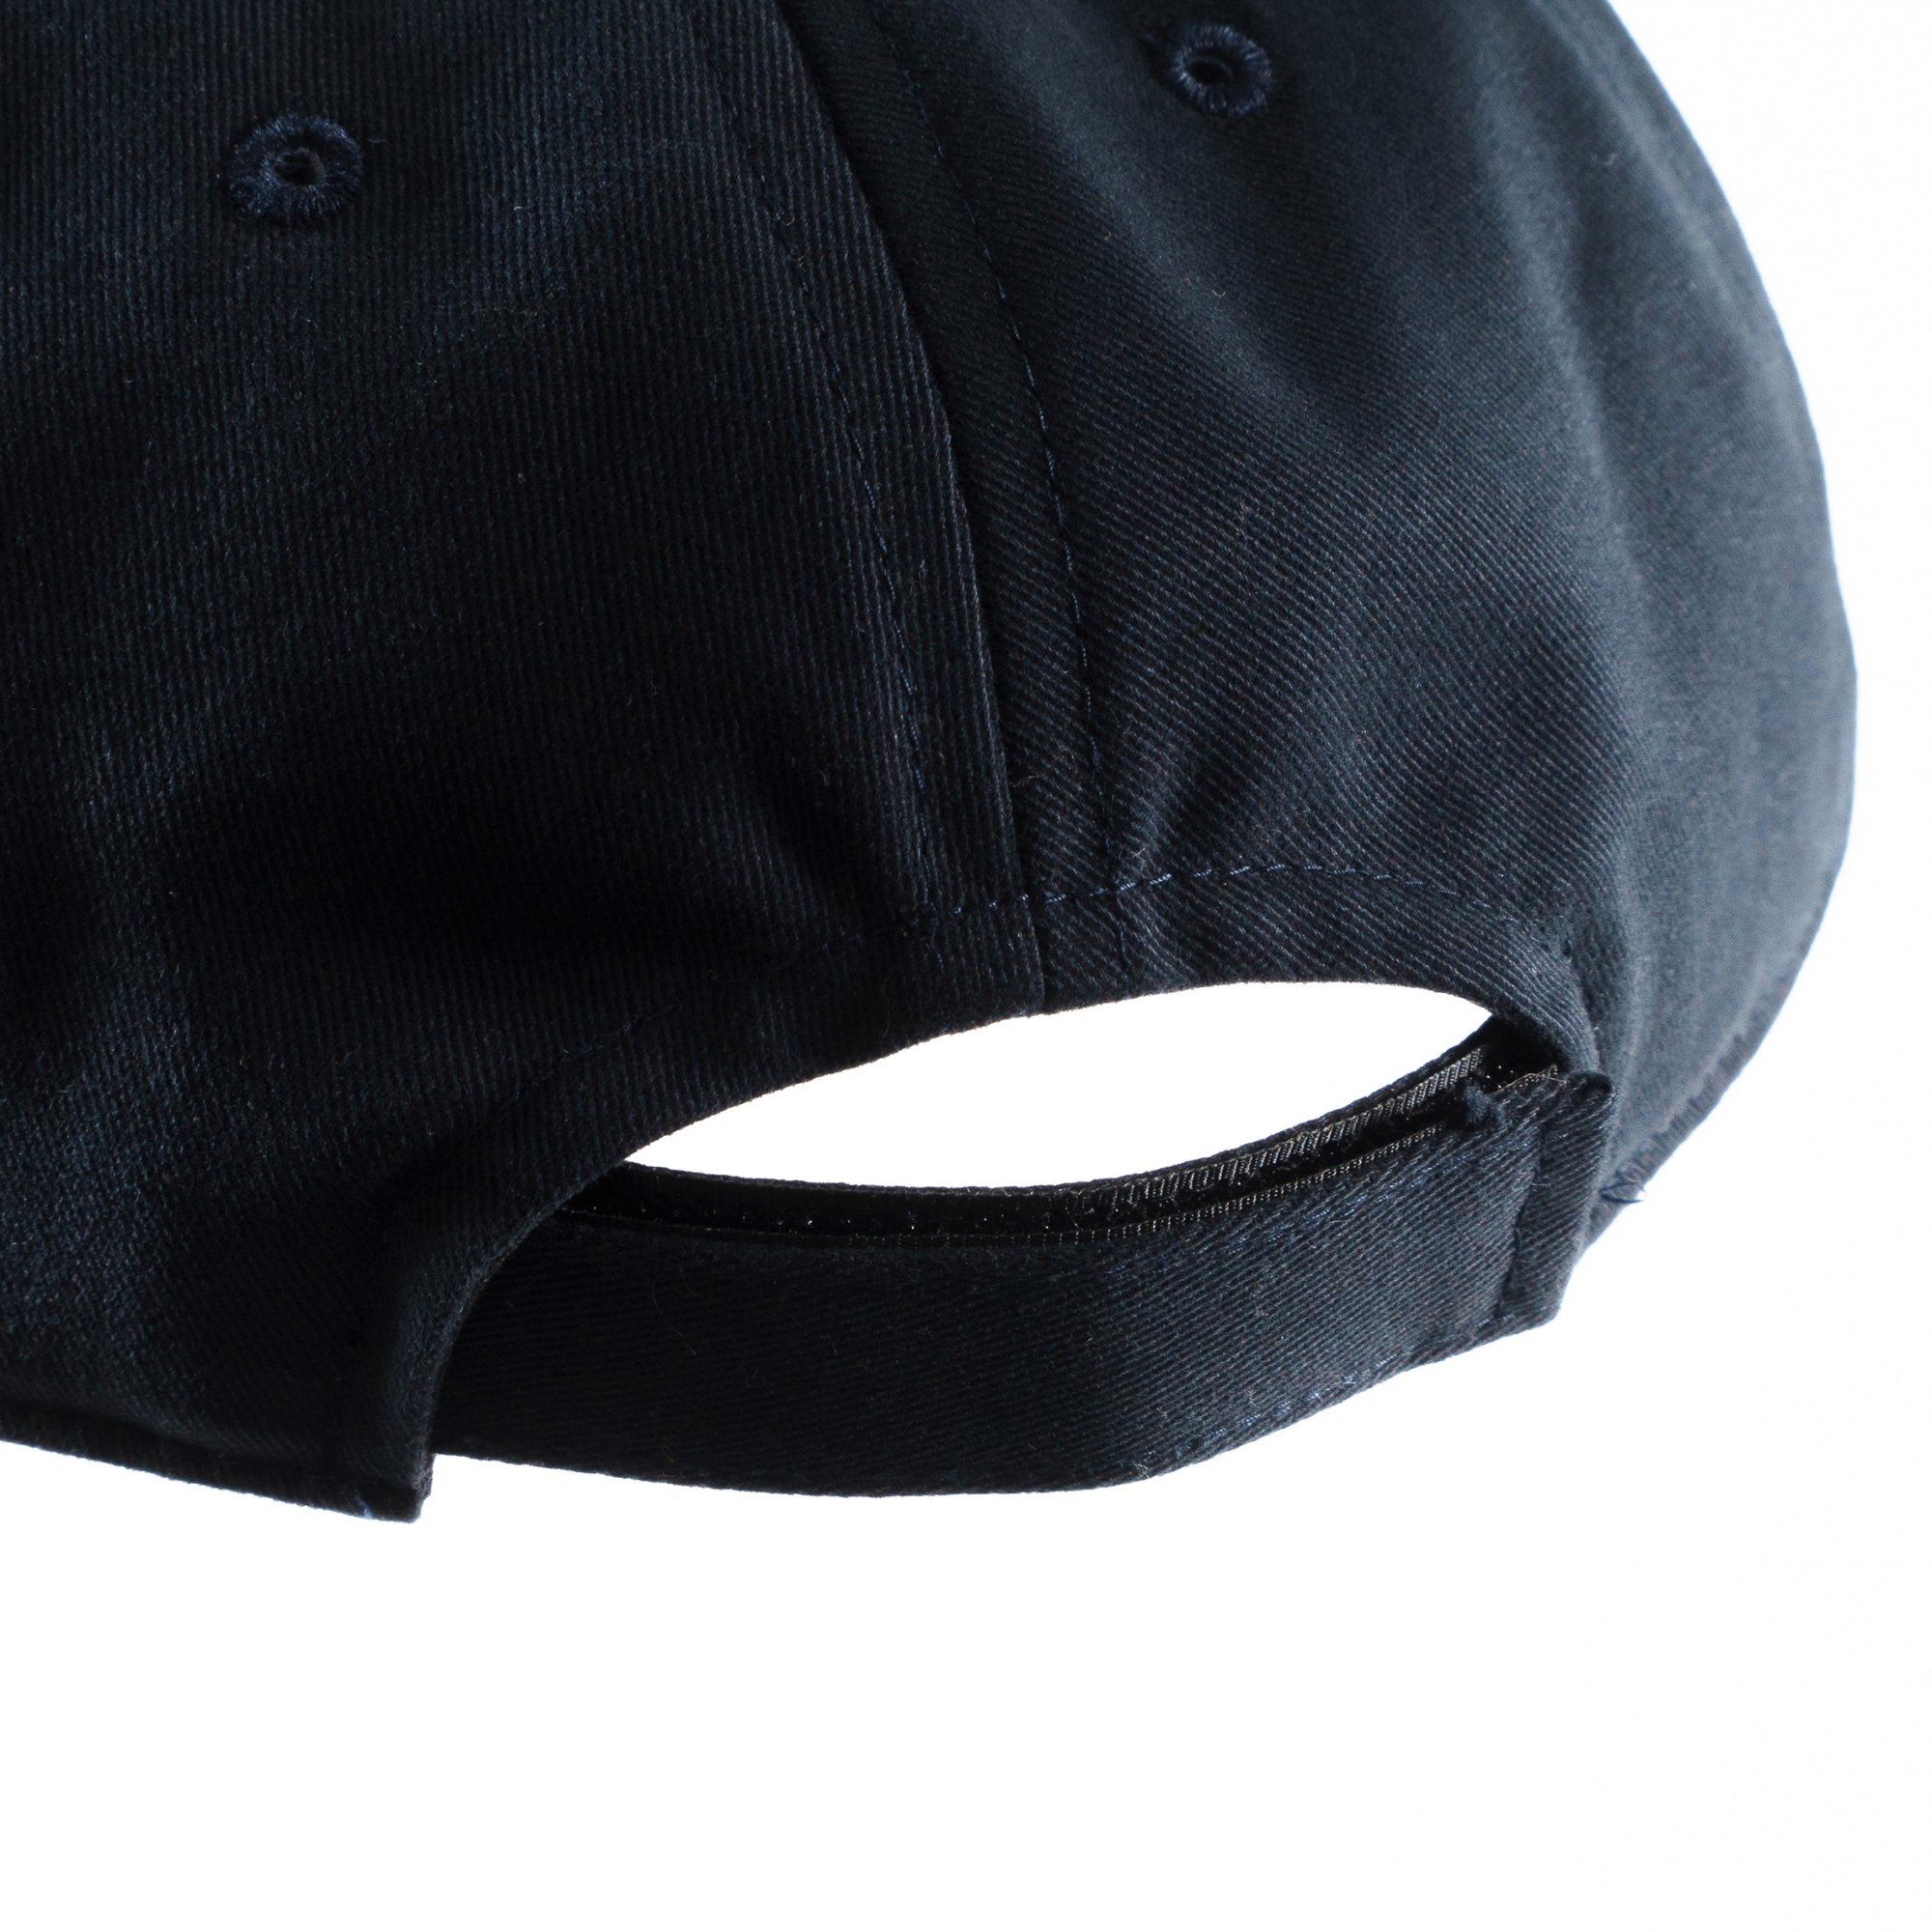 BLUFCAMP<br />7 Panel CAP / Navy<img class='new_mark_img2' src='https://img.shop-pro.jp/img/new/icons14.gif' style='border:none;display:inline;margin:0px;padding:0px;width:auto;' />